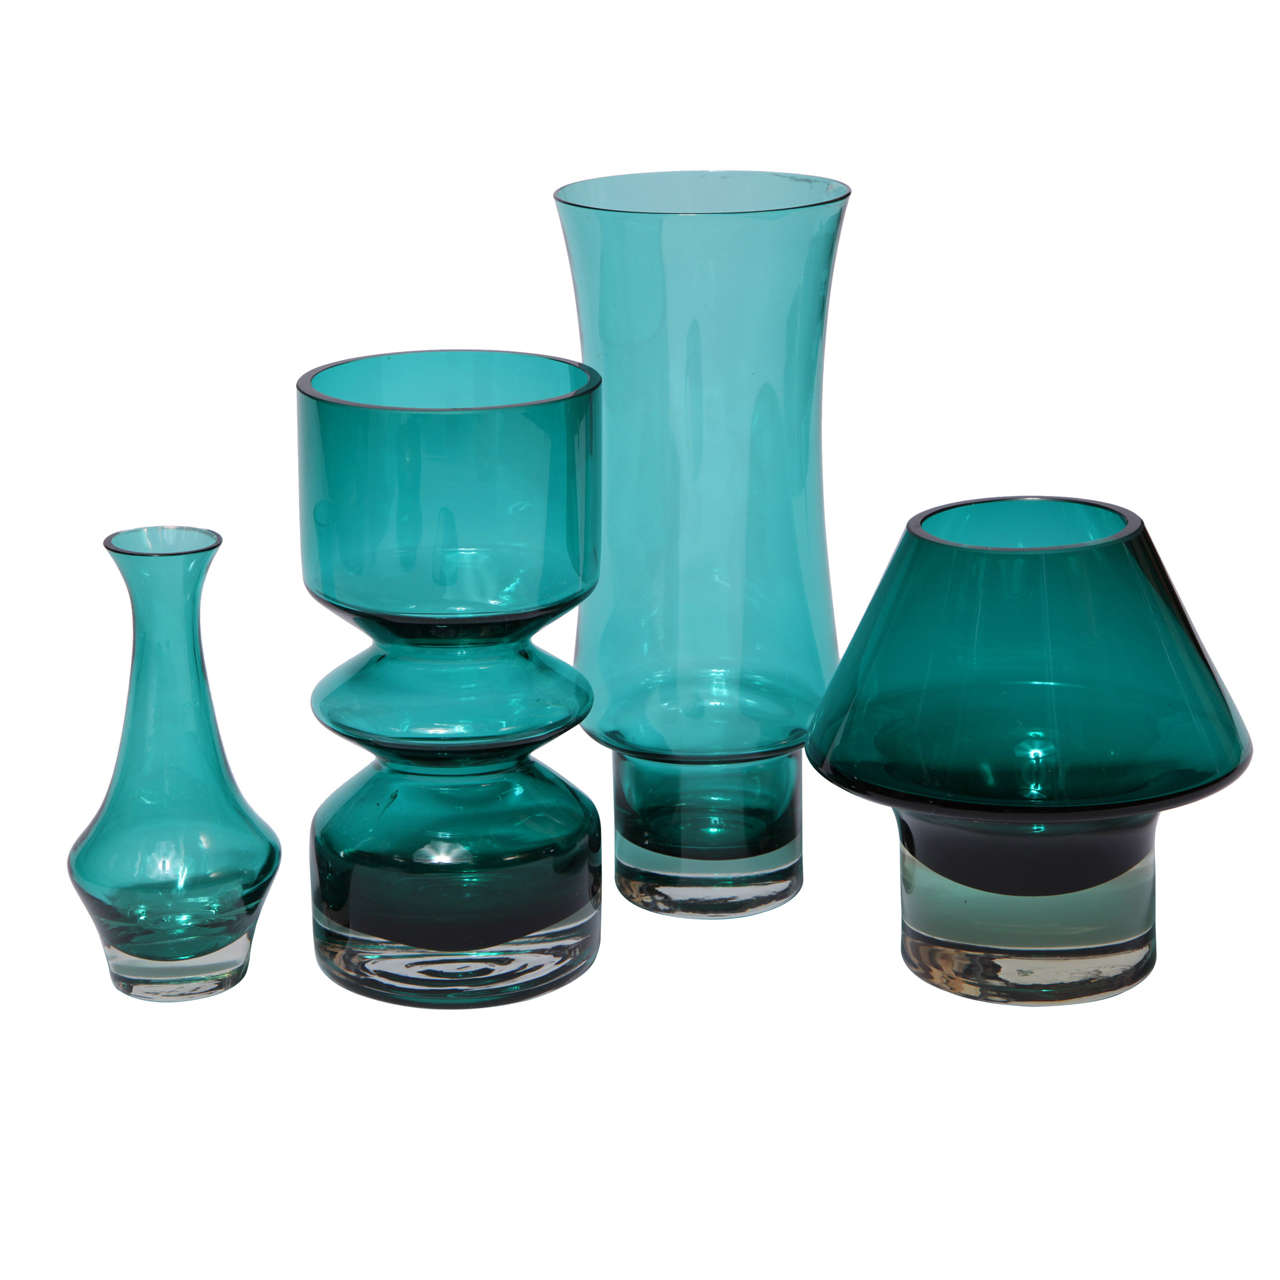 Grouping of Finnish Teal Green Vases